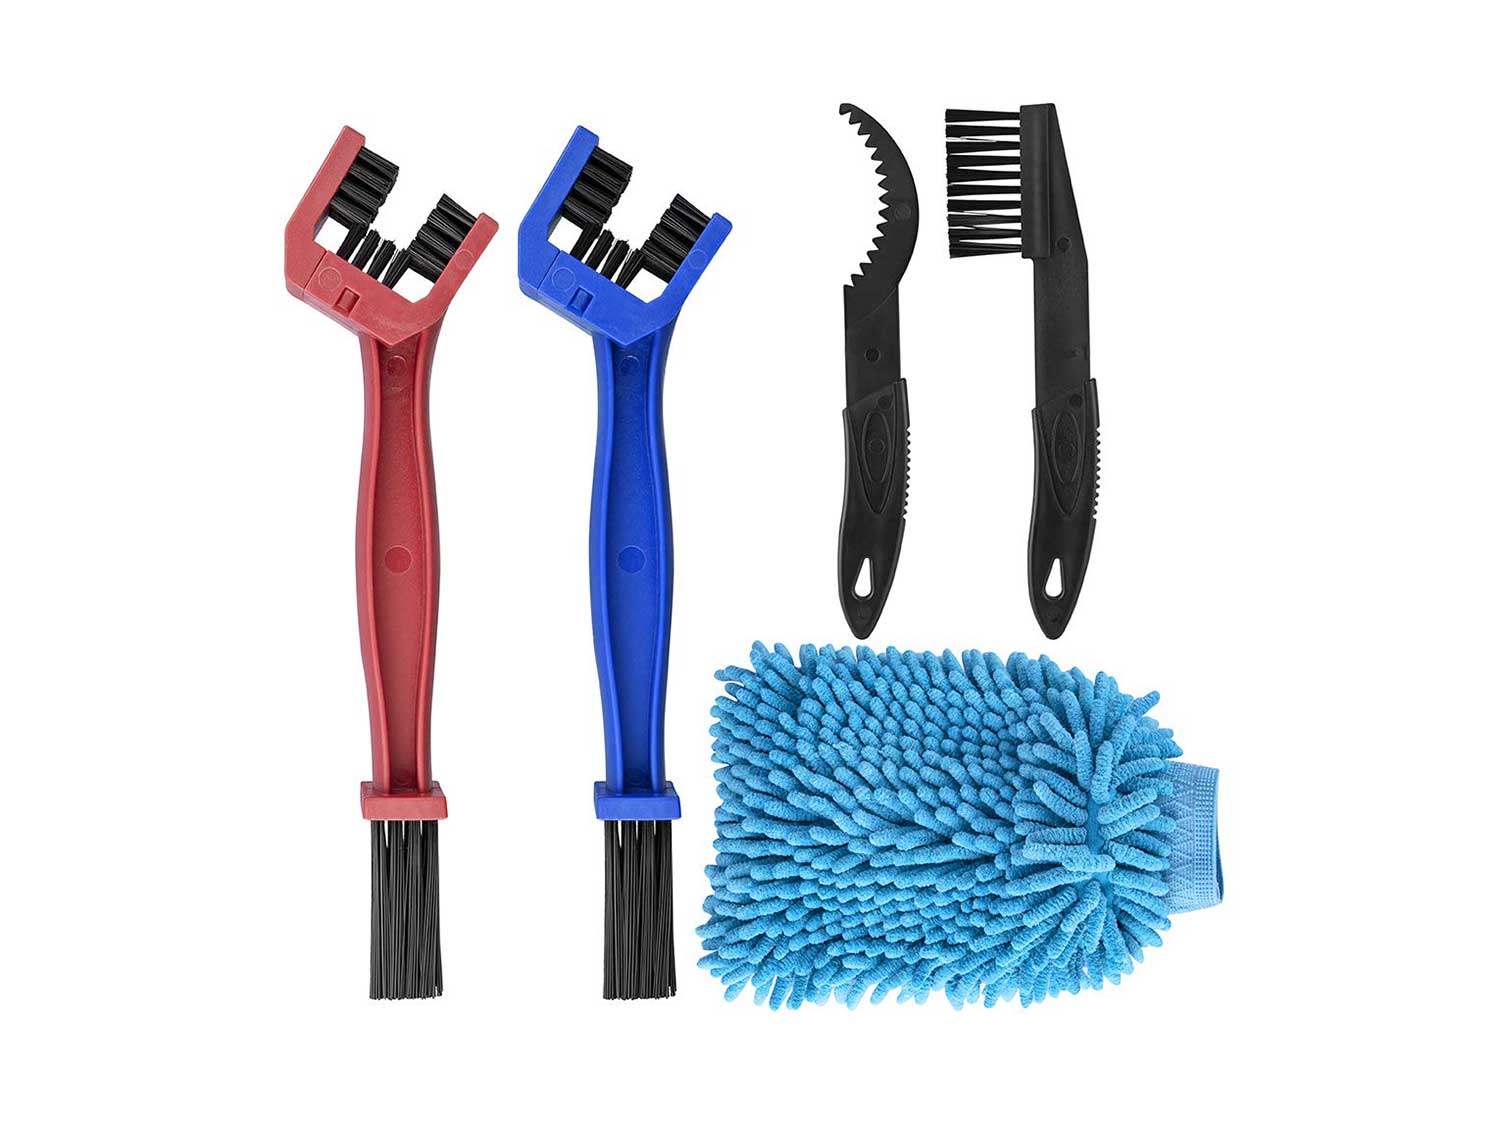 Autder Motorcycle Chain Cleaning Brush Kit